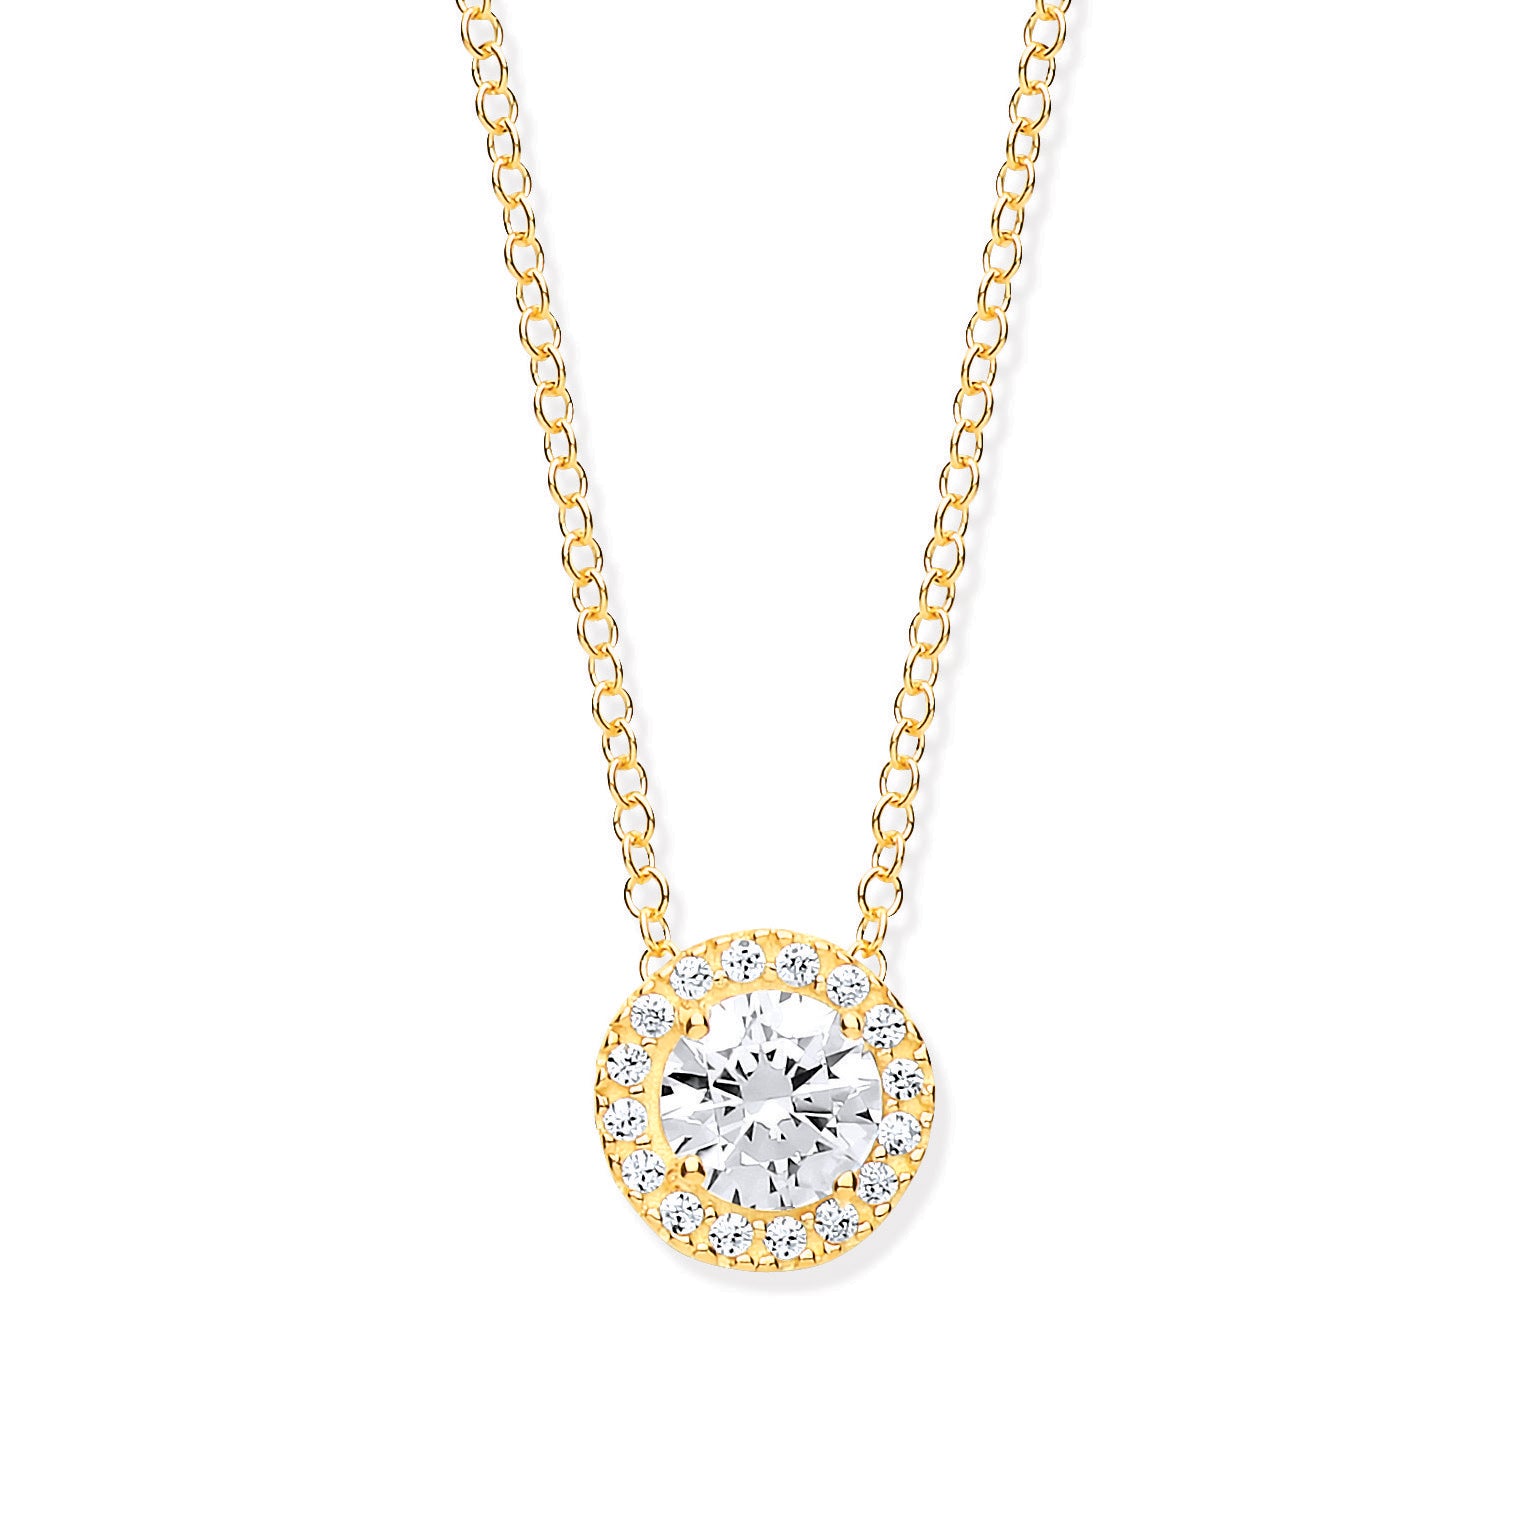 9ct Gold CZ Halo Pendant with Chain